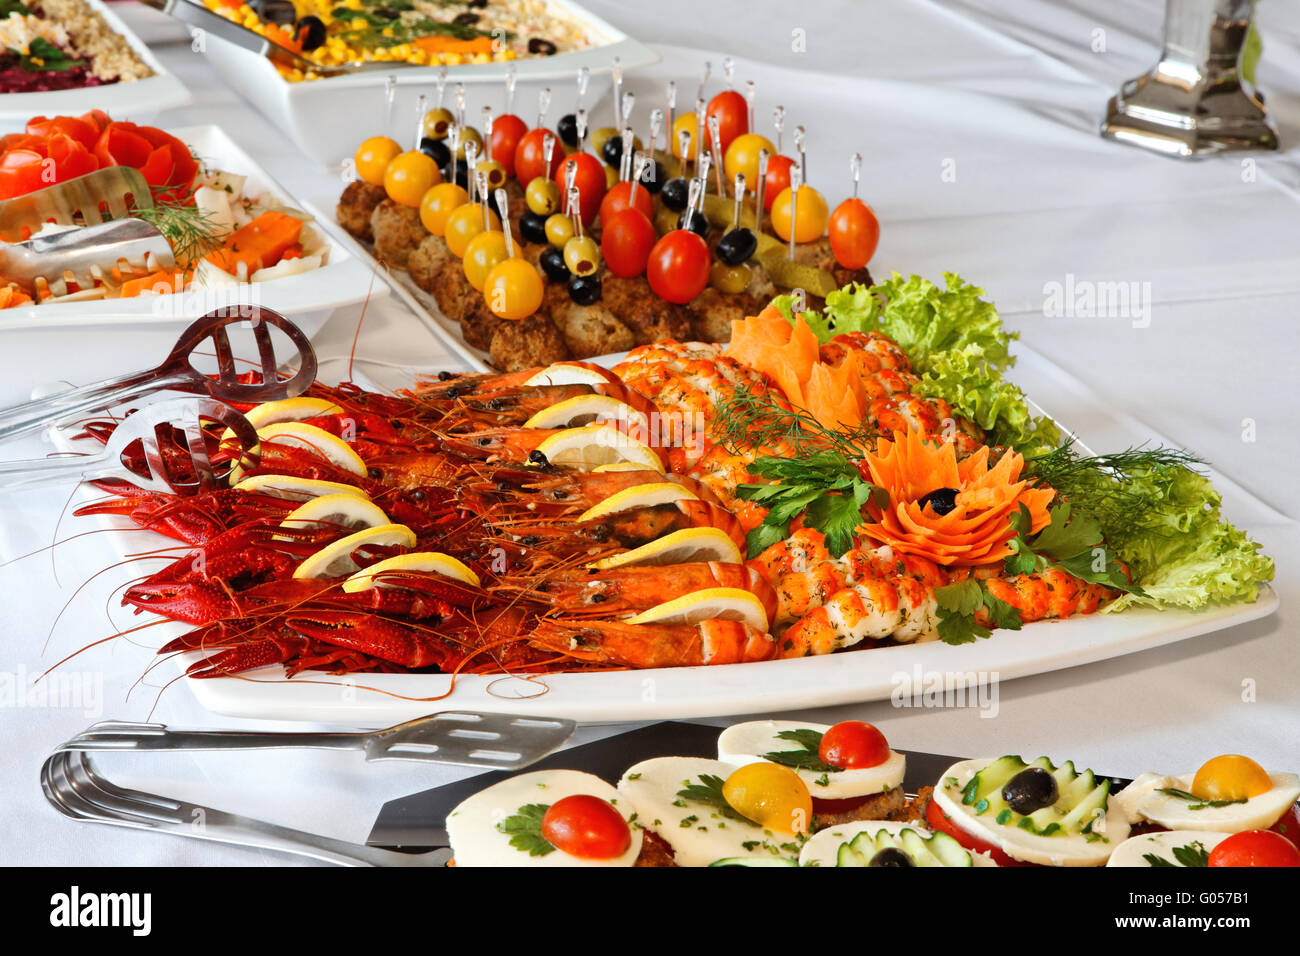 Cold buffet. Stock Photo